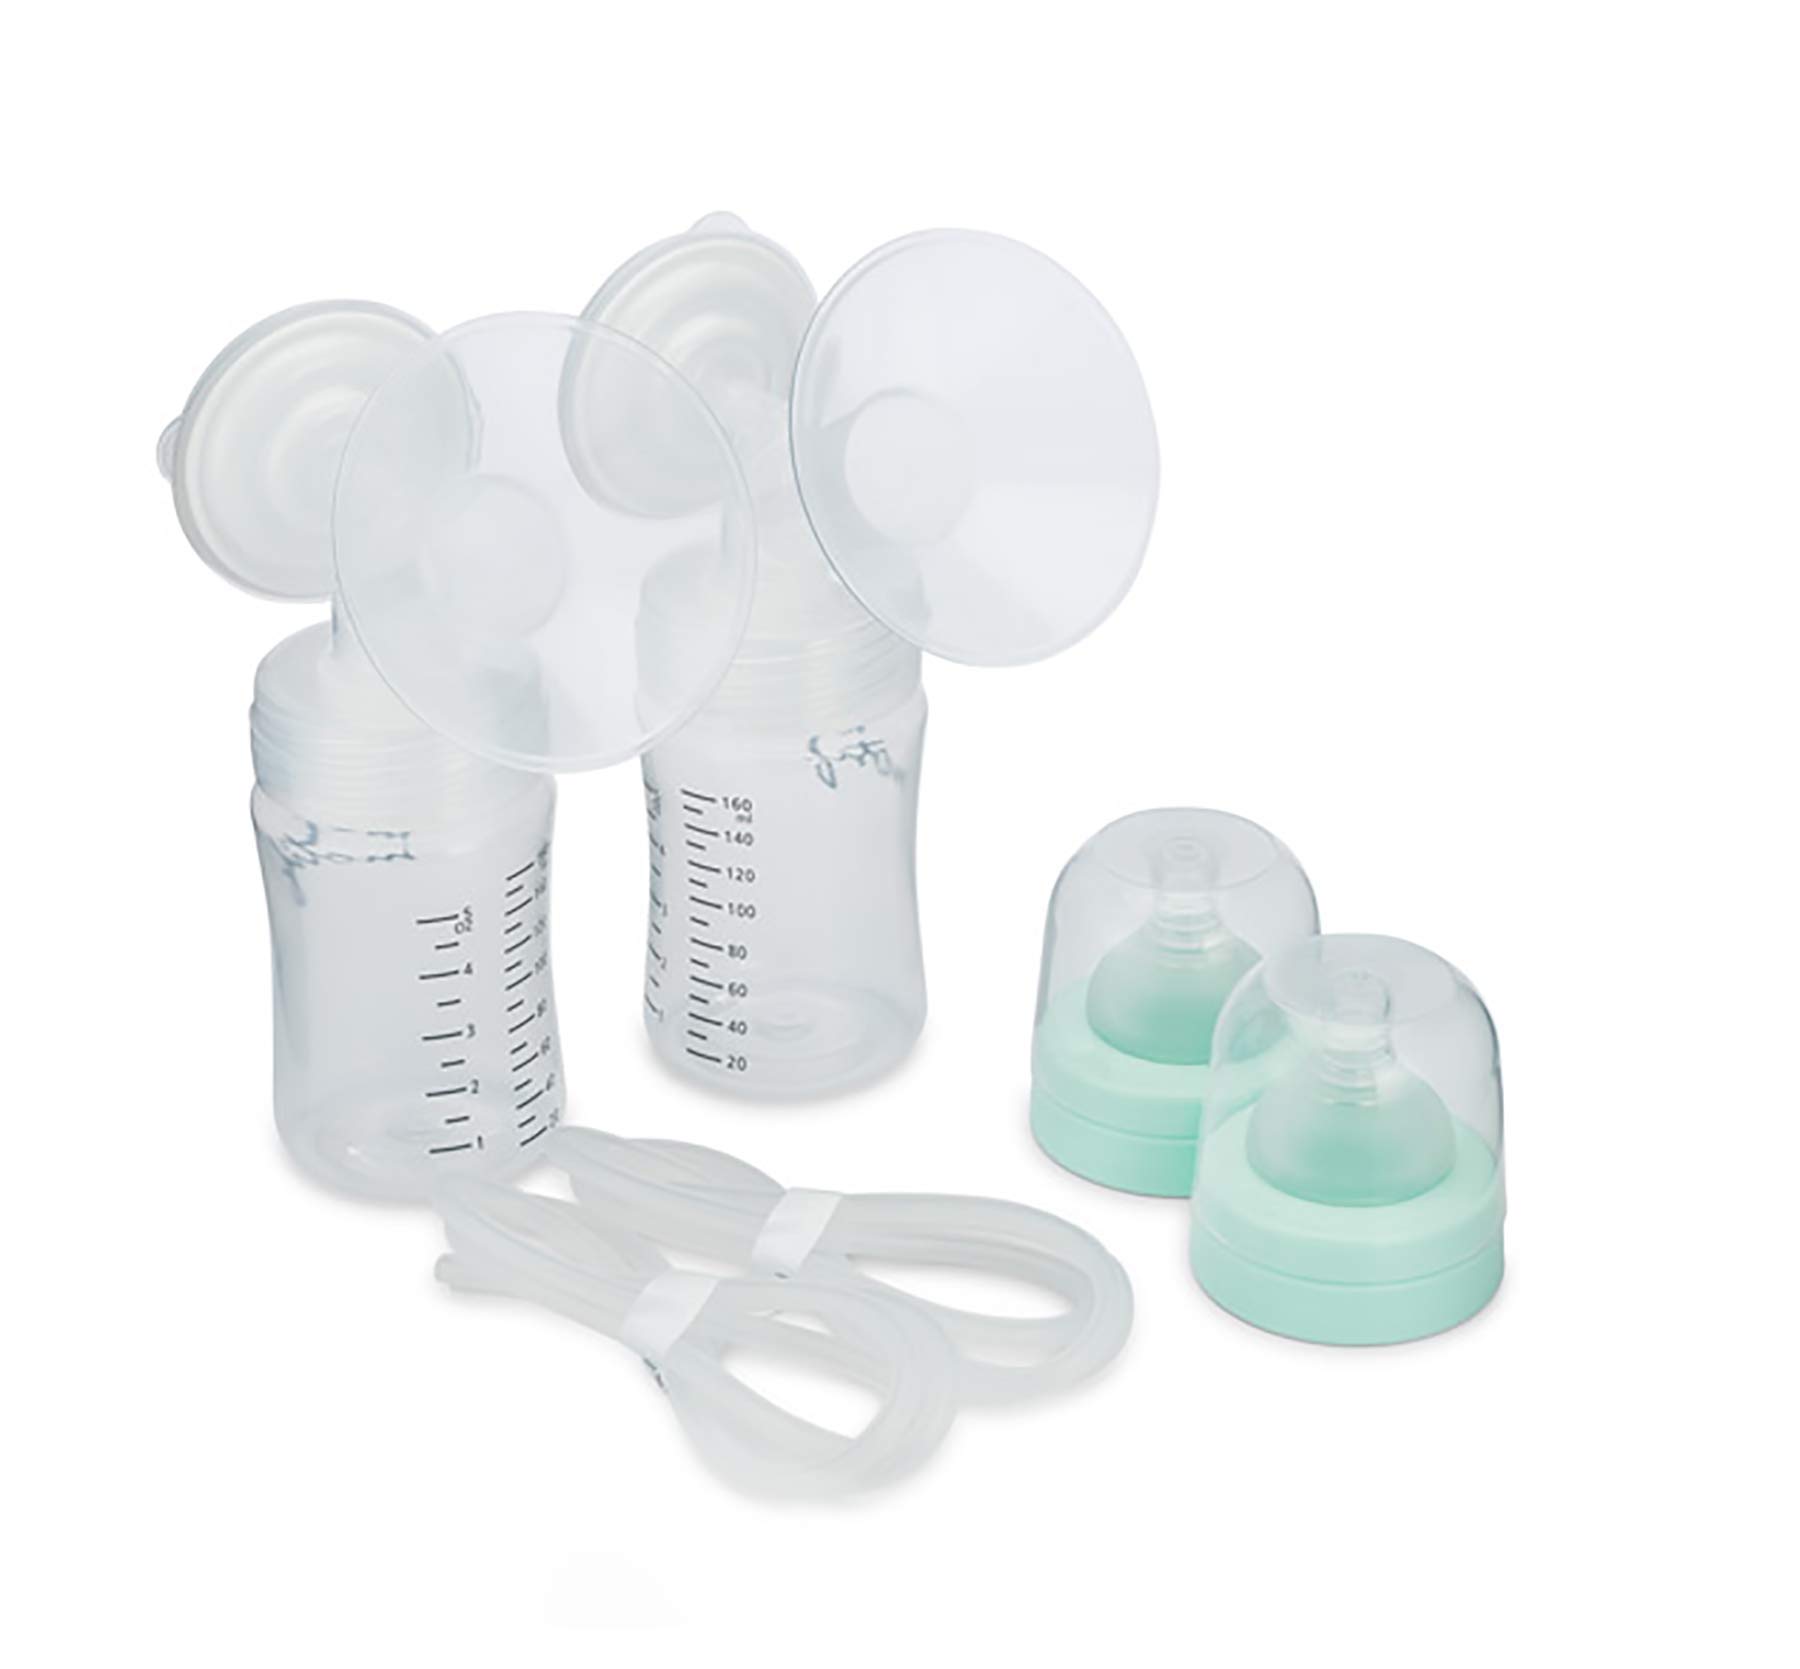 Motif Medical, Luna Double Pumping Kit, Replacement Parts for Breast Pump - Med (24mm)